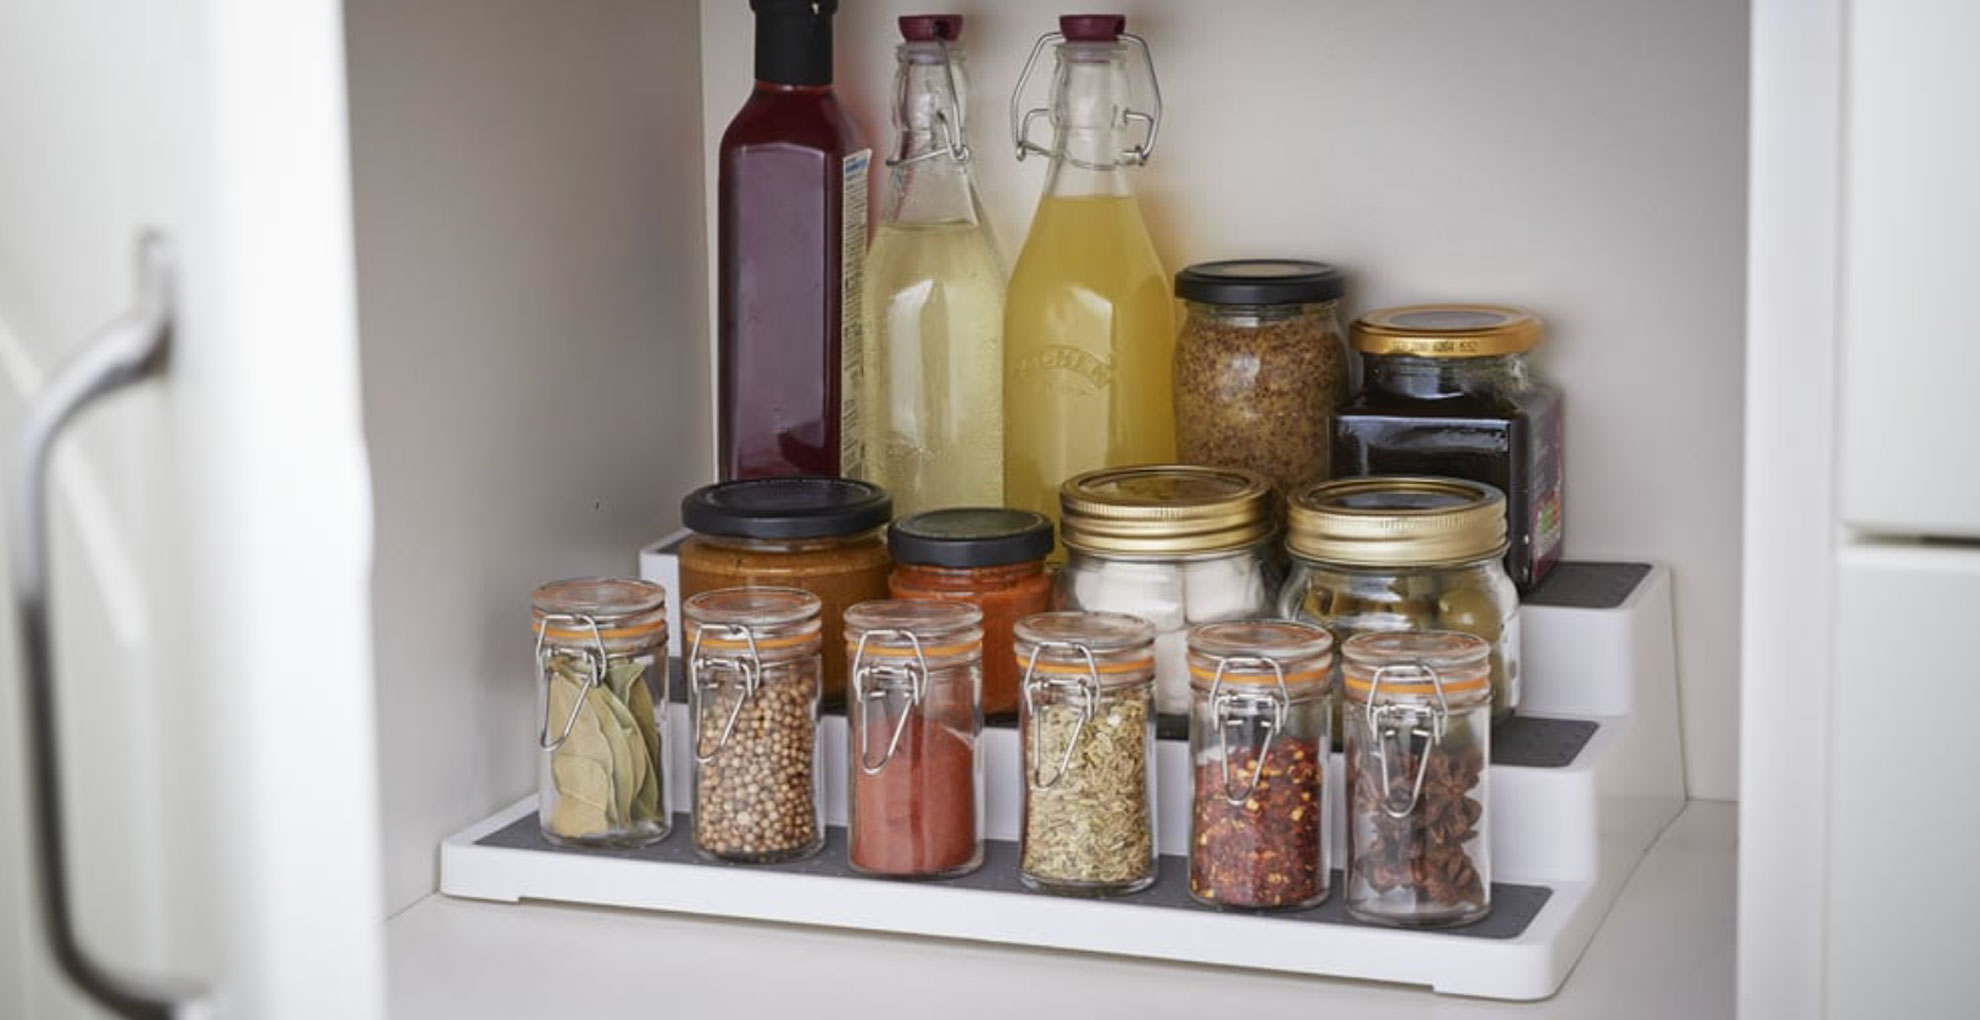 organize kitchen cabinet with staggered storage unit to store ingredients at different levels for ease